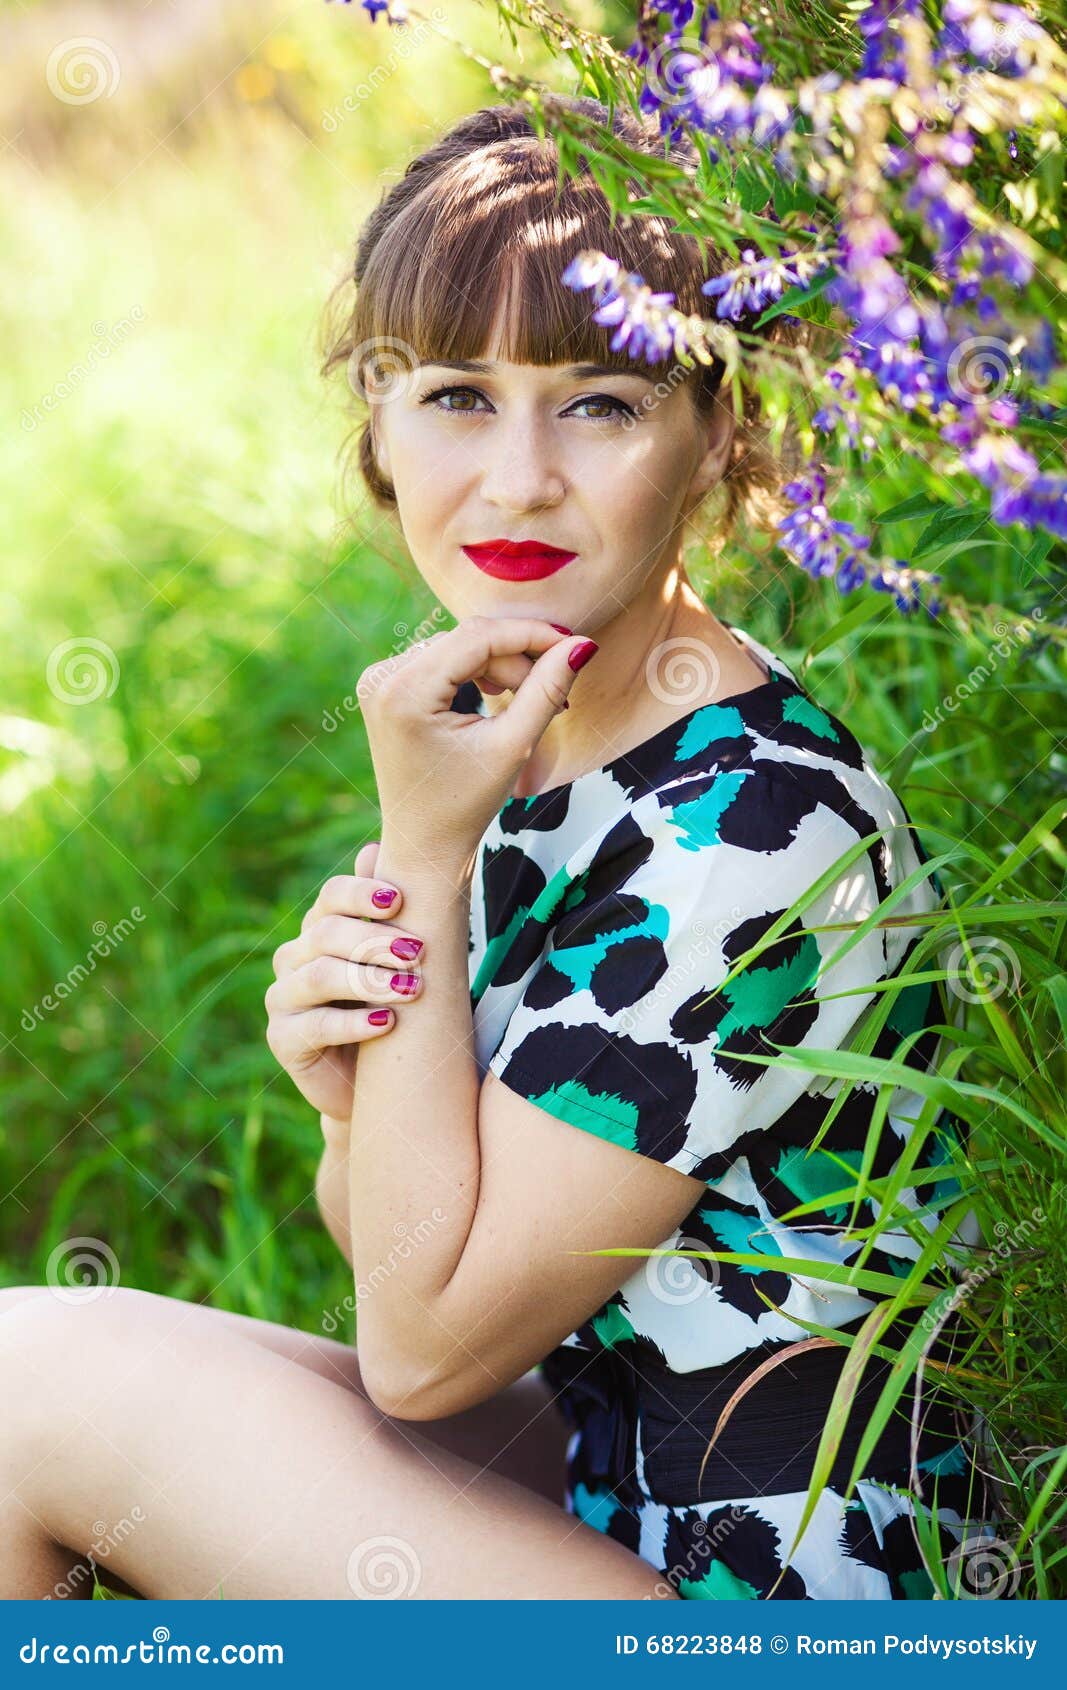 Fashion Portrait Of Young Sensual Woman In Garden. Stock 